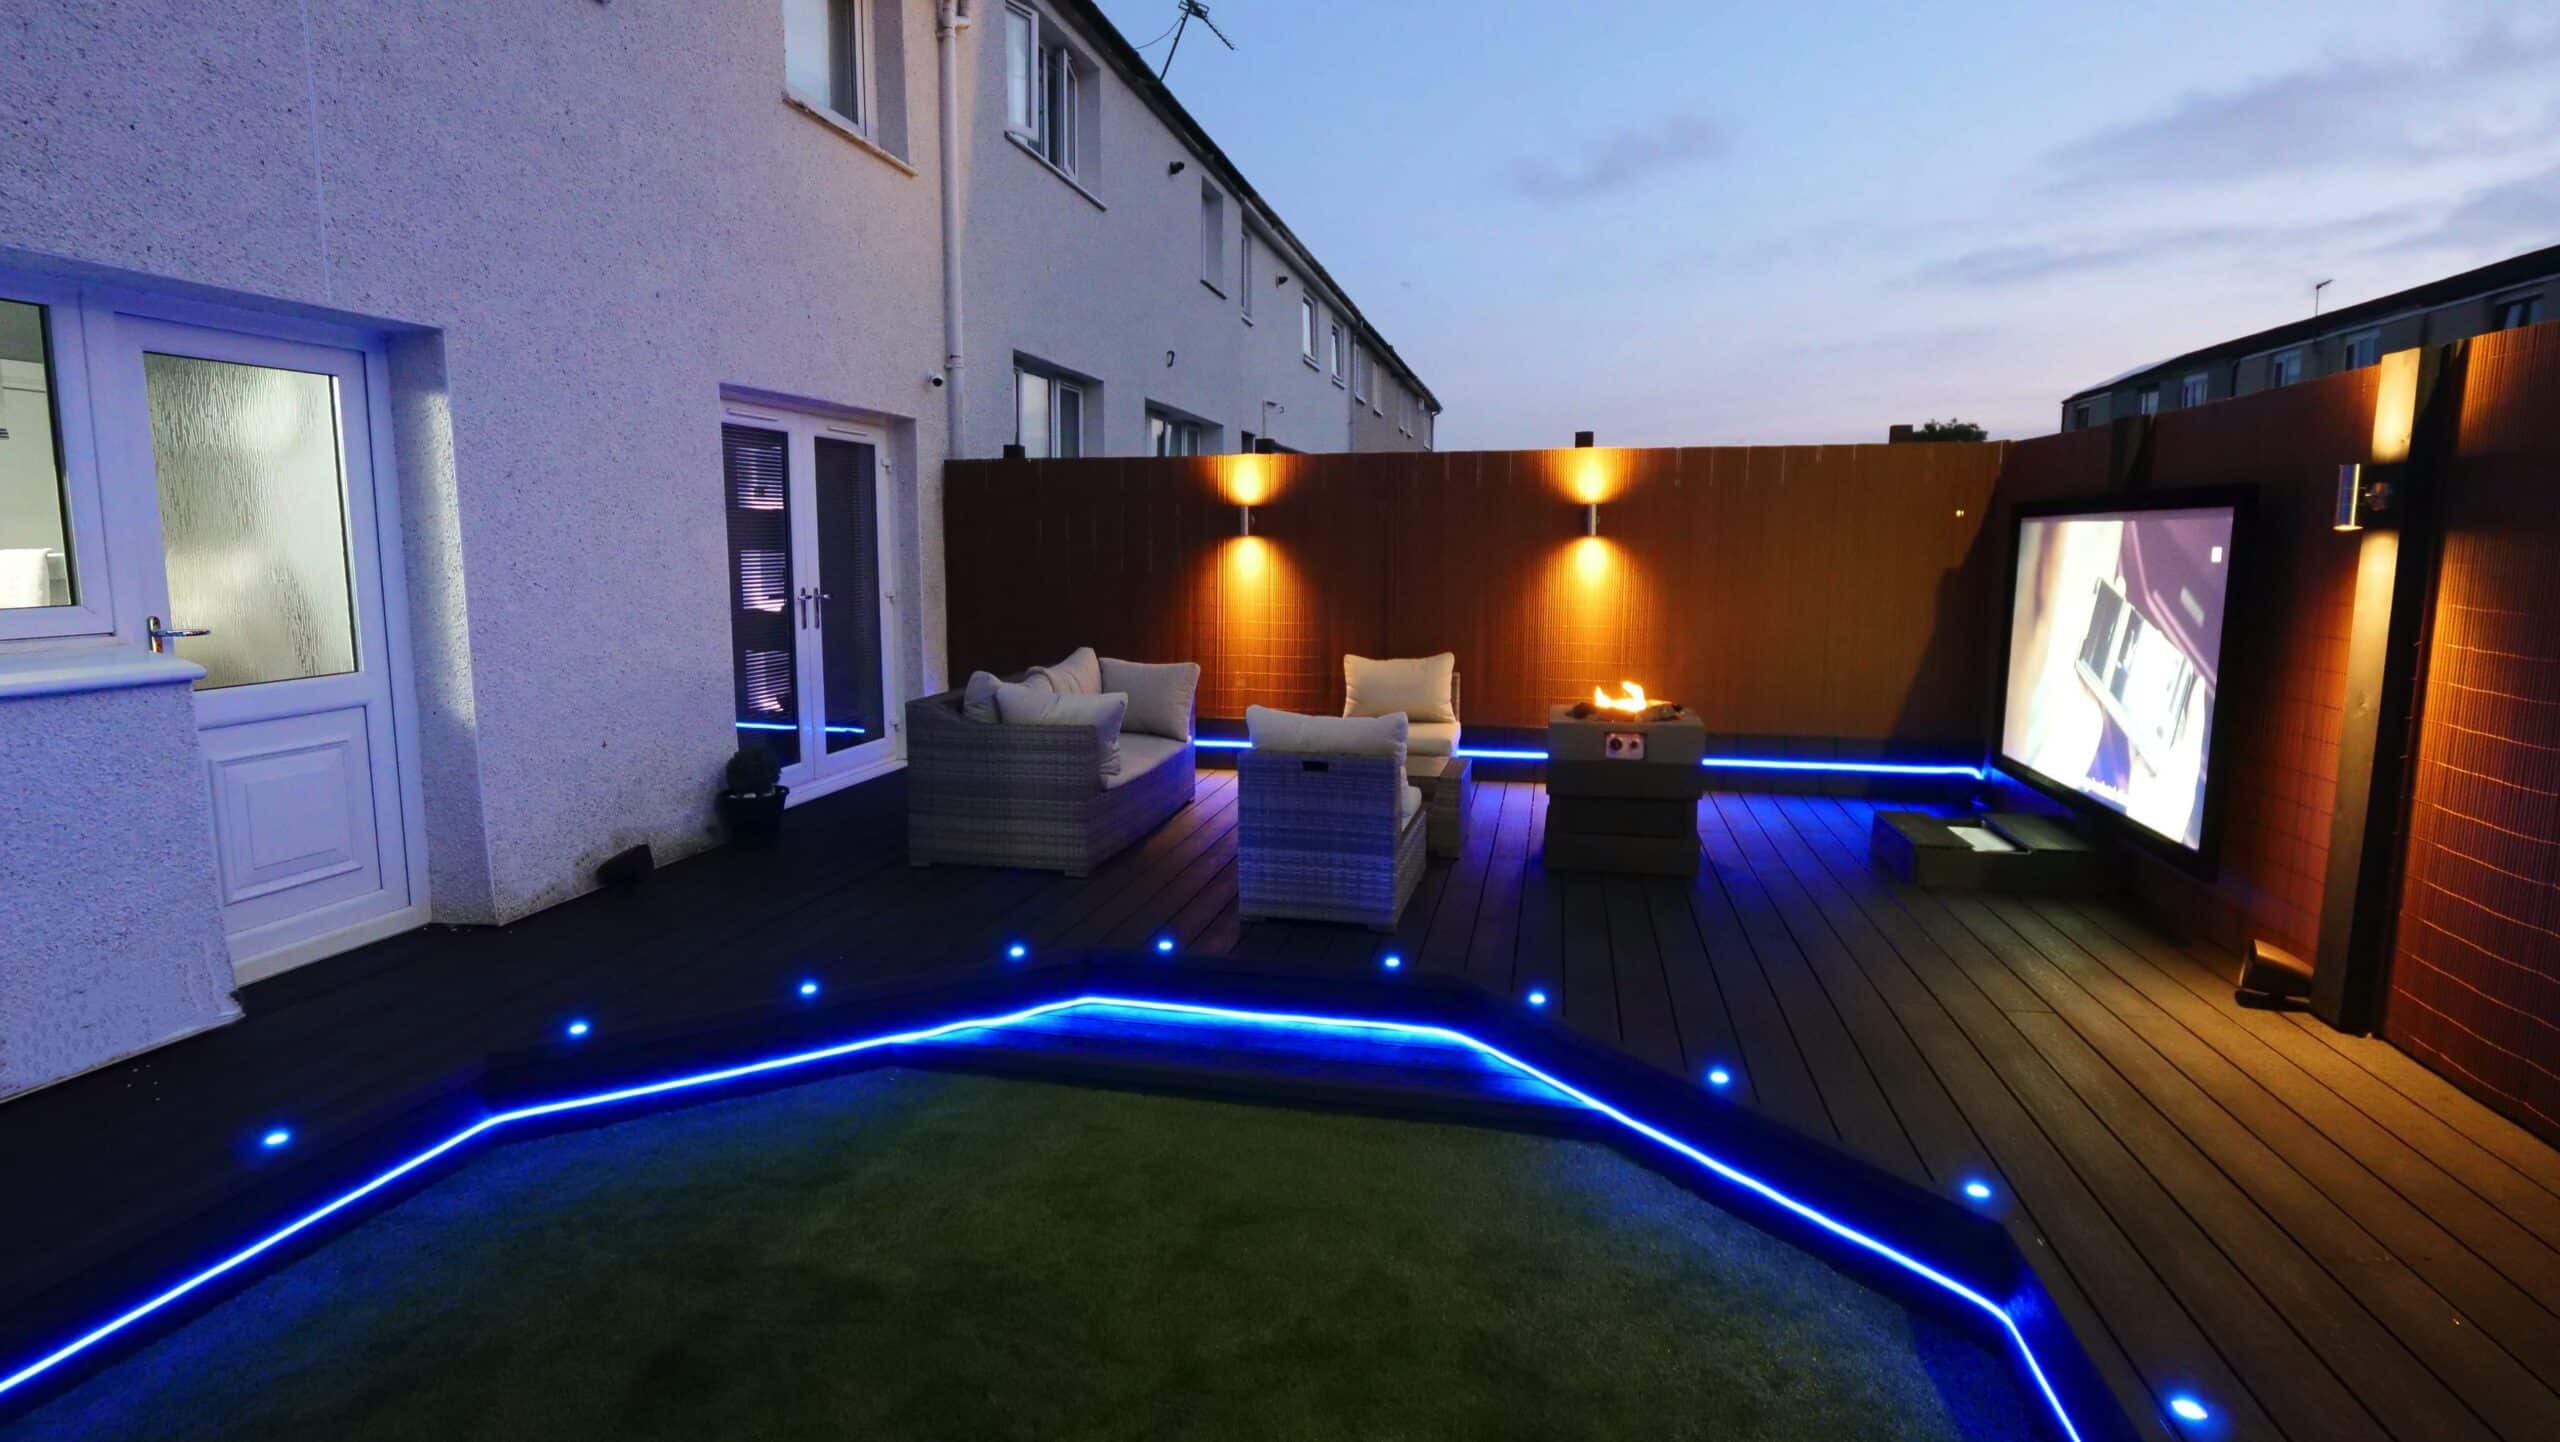 Find out more about our bespoke home garden cinema solutions